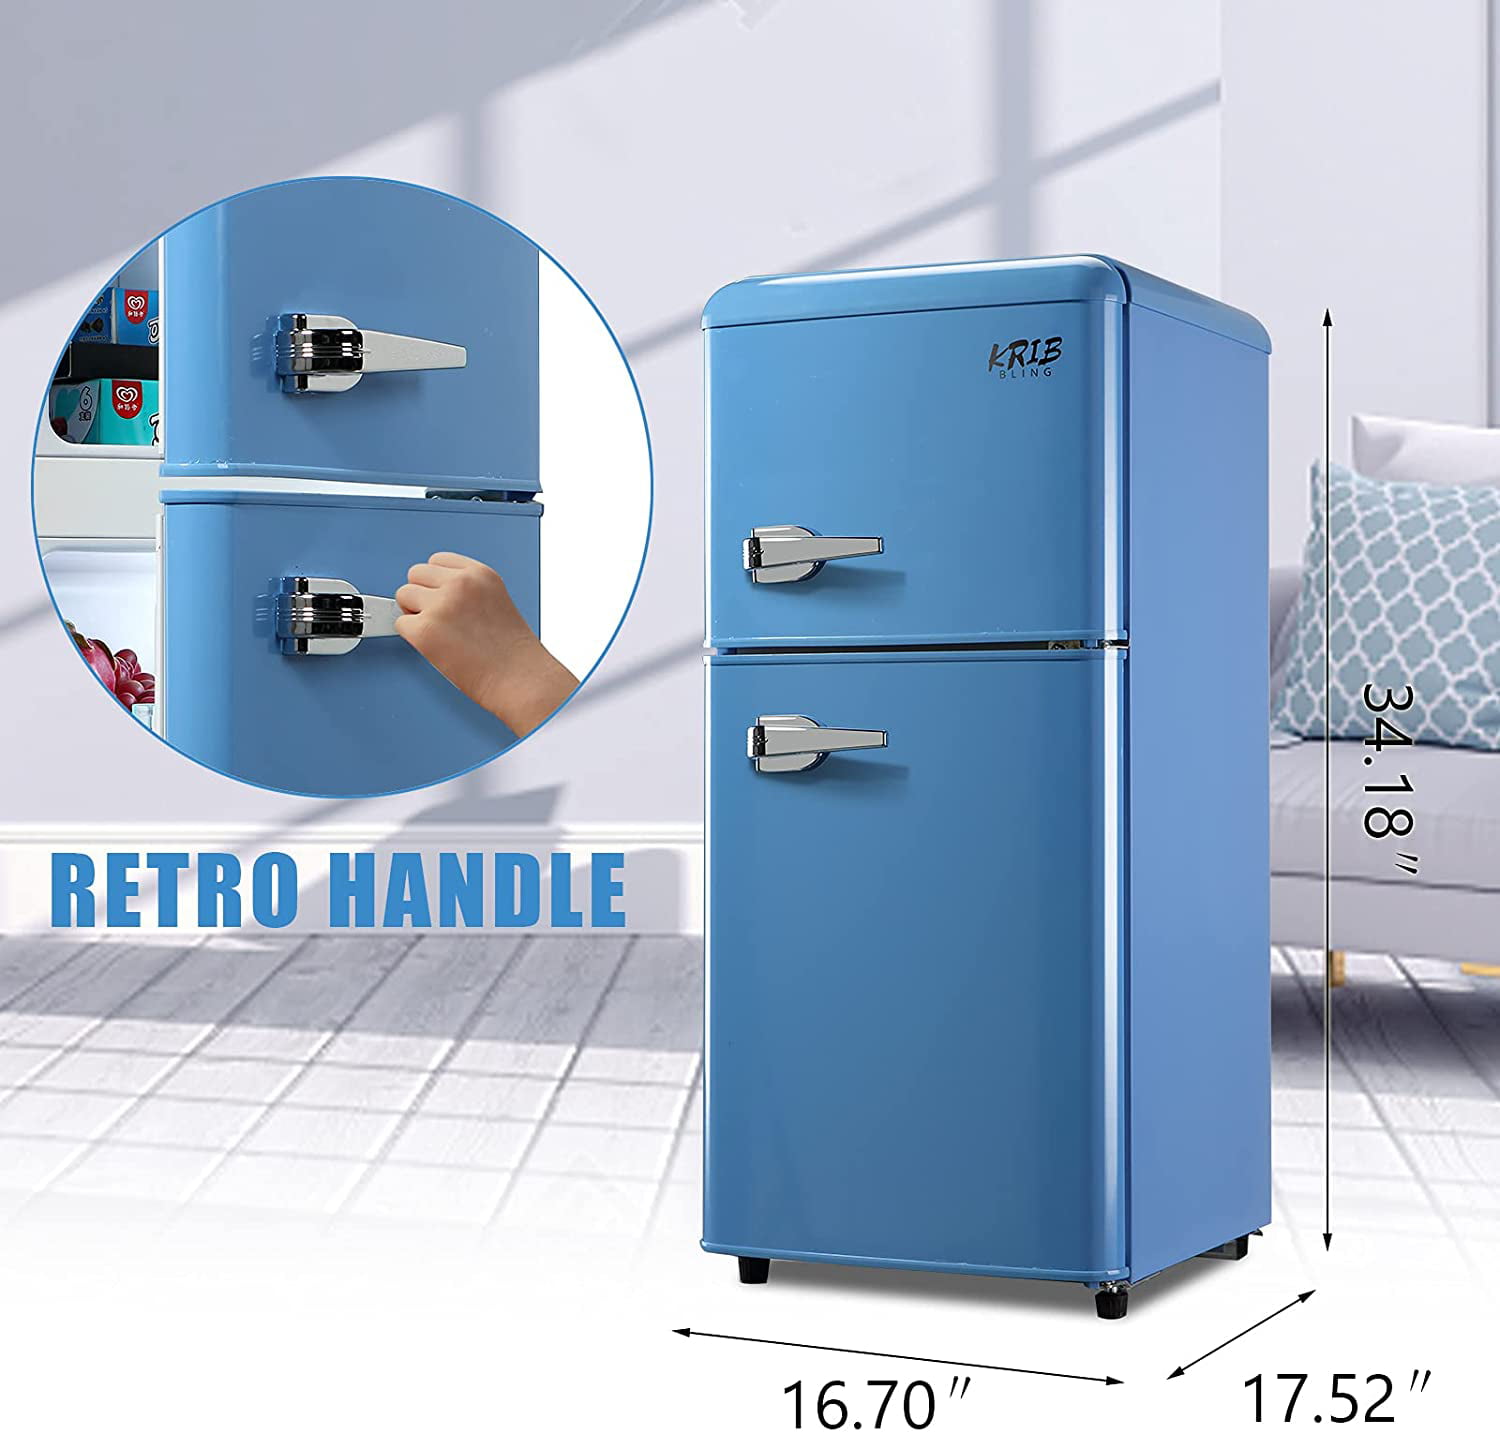 Krib Bling 3.5 cu.ft Compact Refrigerator, Retro Mini Fridge with Freezer,  Small Drink Chiller with 2 Door, Blue